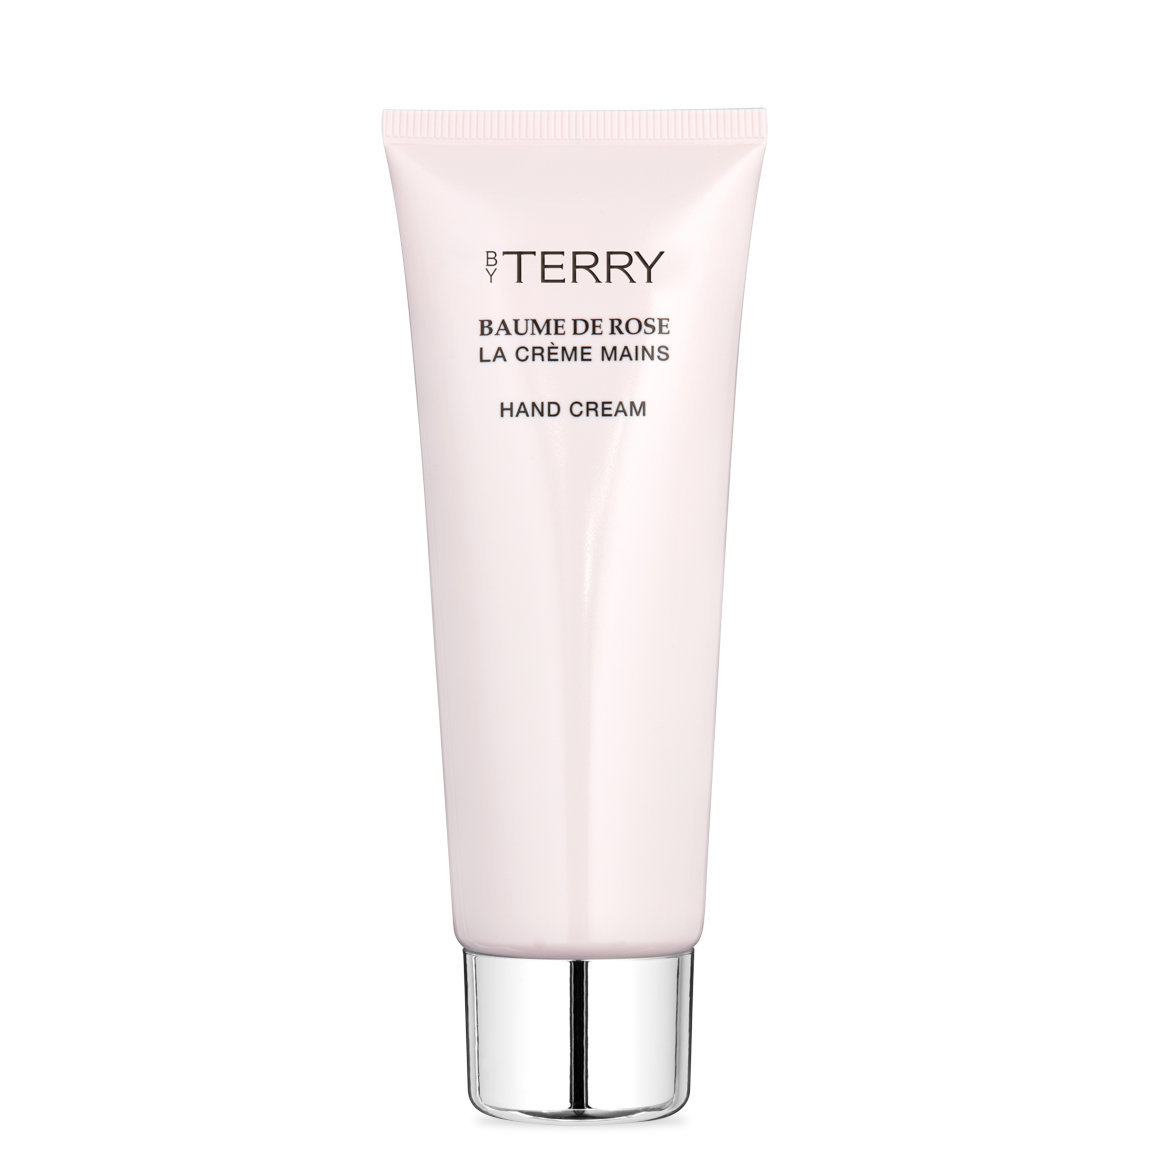 BY TERRY Baume de Rose Hand Cream alternative view 1 - product swatch.